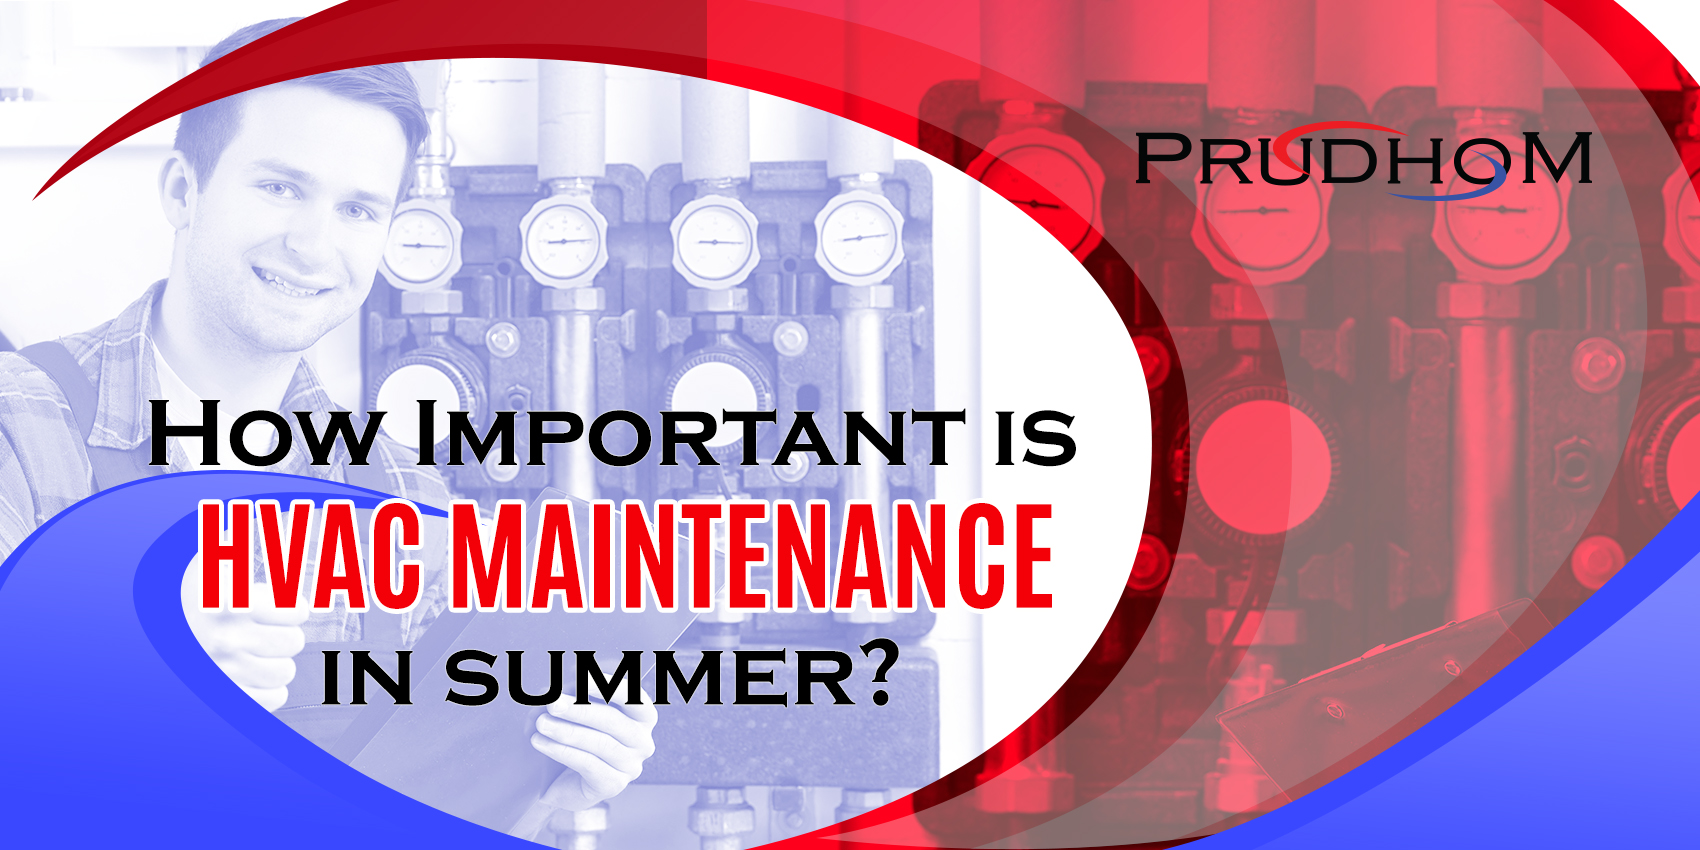 How Important is HVAC Maintenance during the Summer